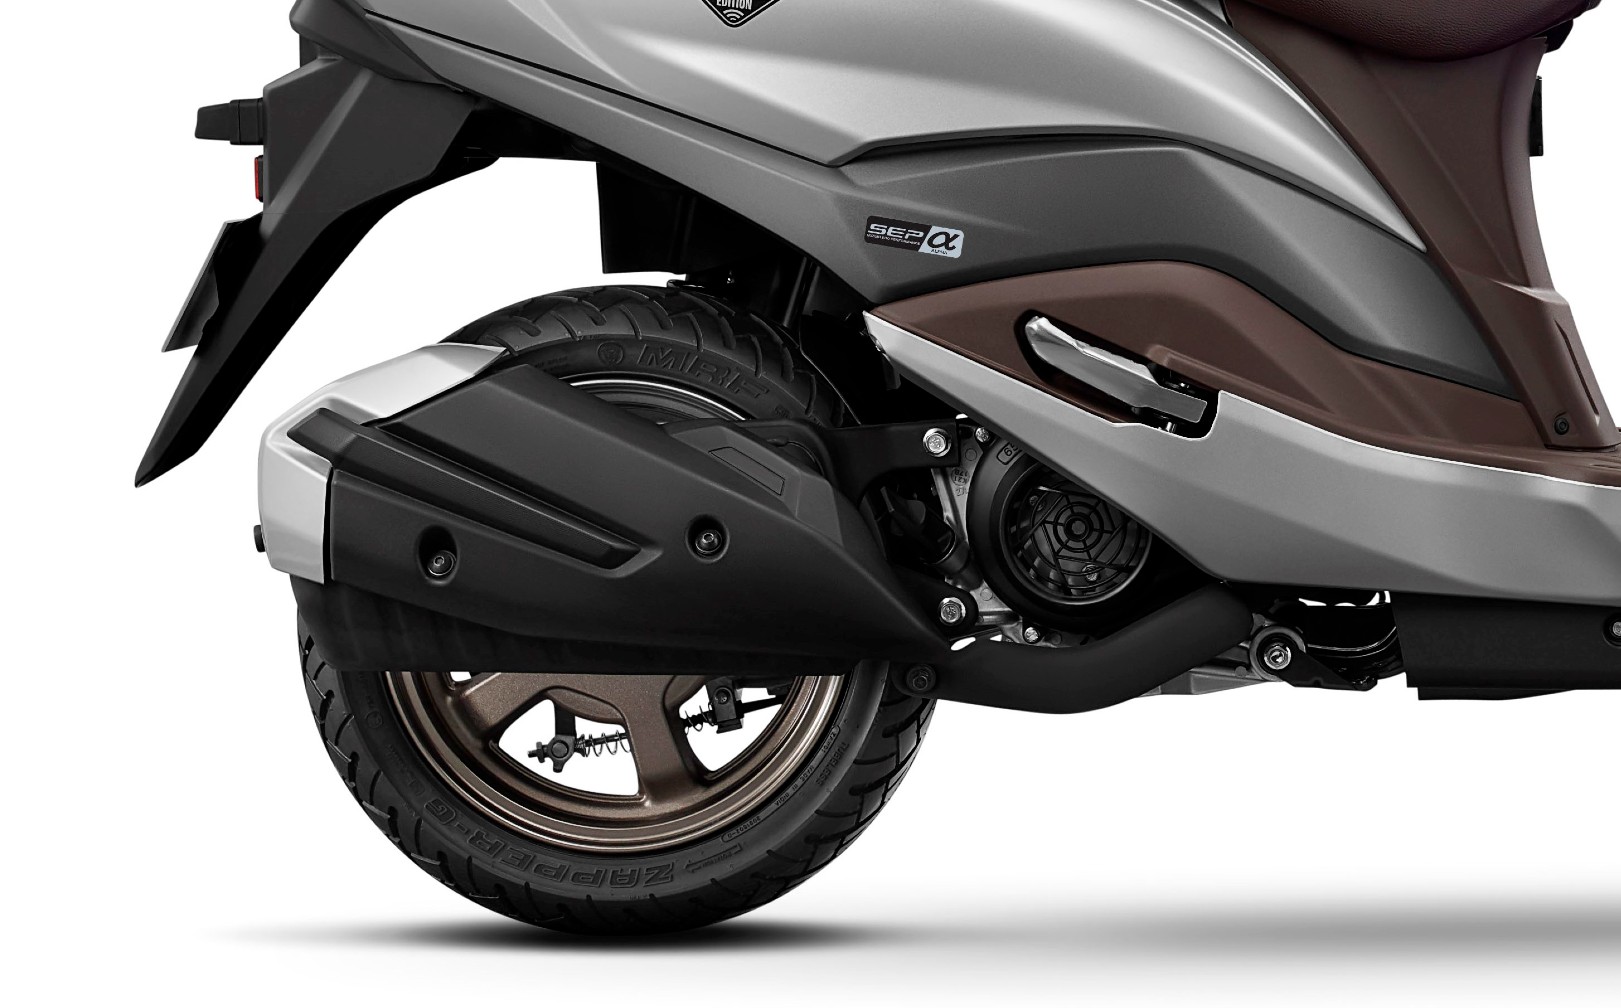 Suzuki Burgman Street EX gets larger 12-inch rear wheels and wider 100/80-section tires for better grip and efficiency